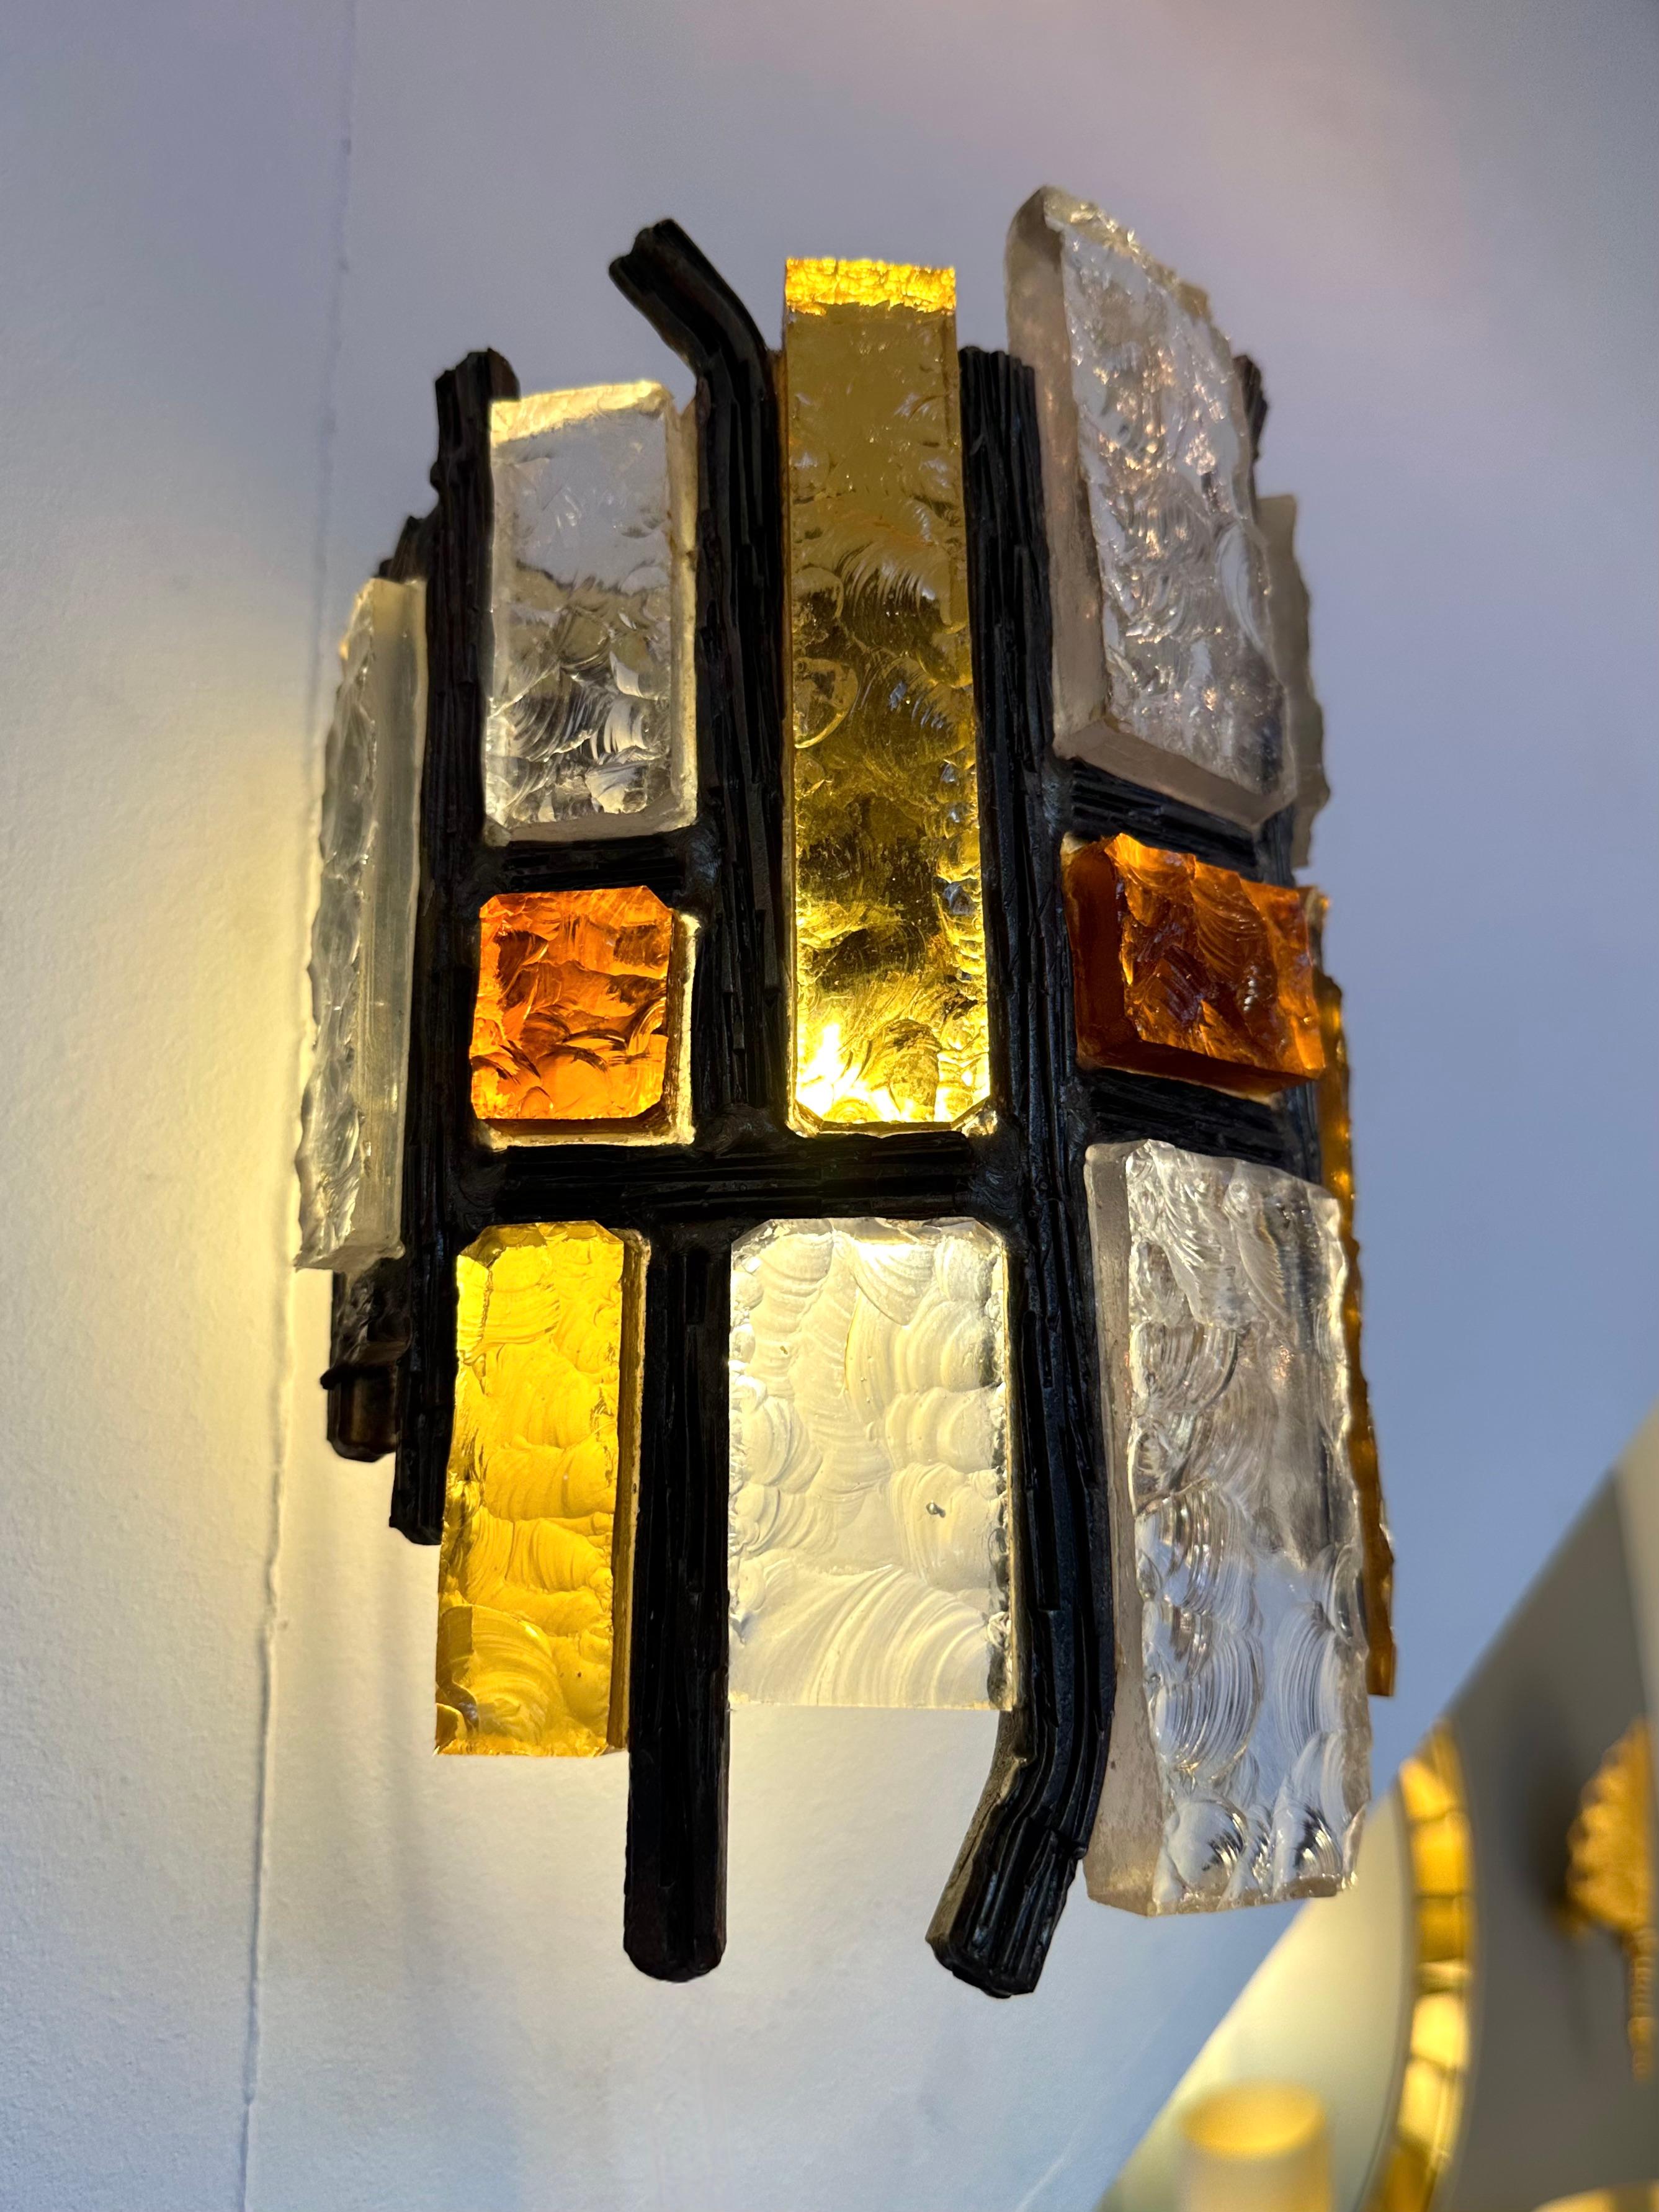 Late 20th Century Pair of Hammered Glass Wrought Iron Sconces by Longobard, Italy, 1970s For Sale